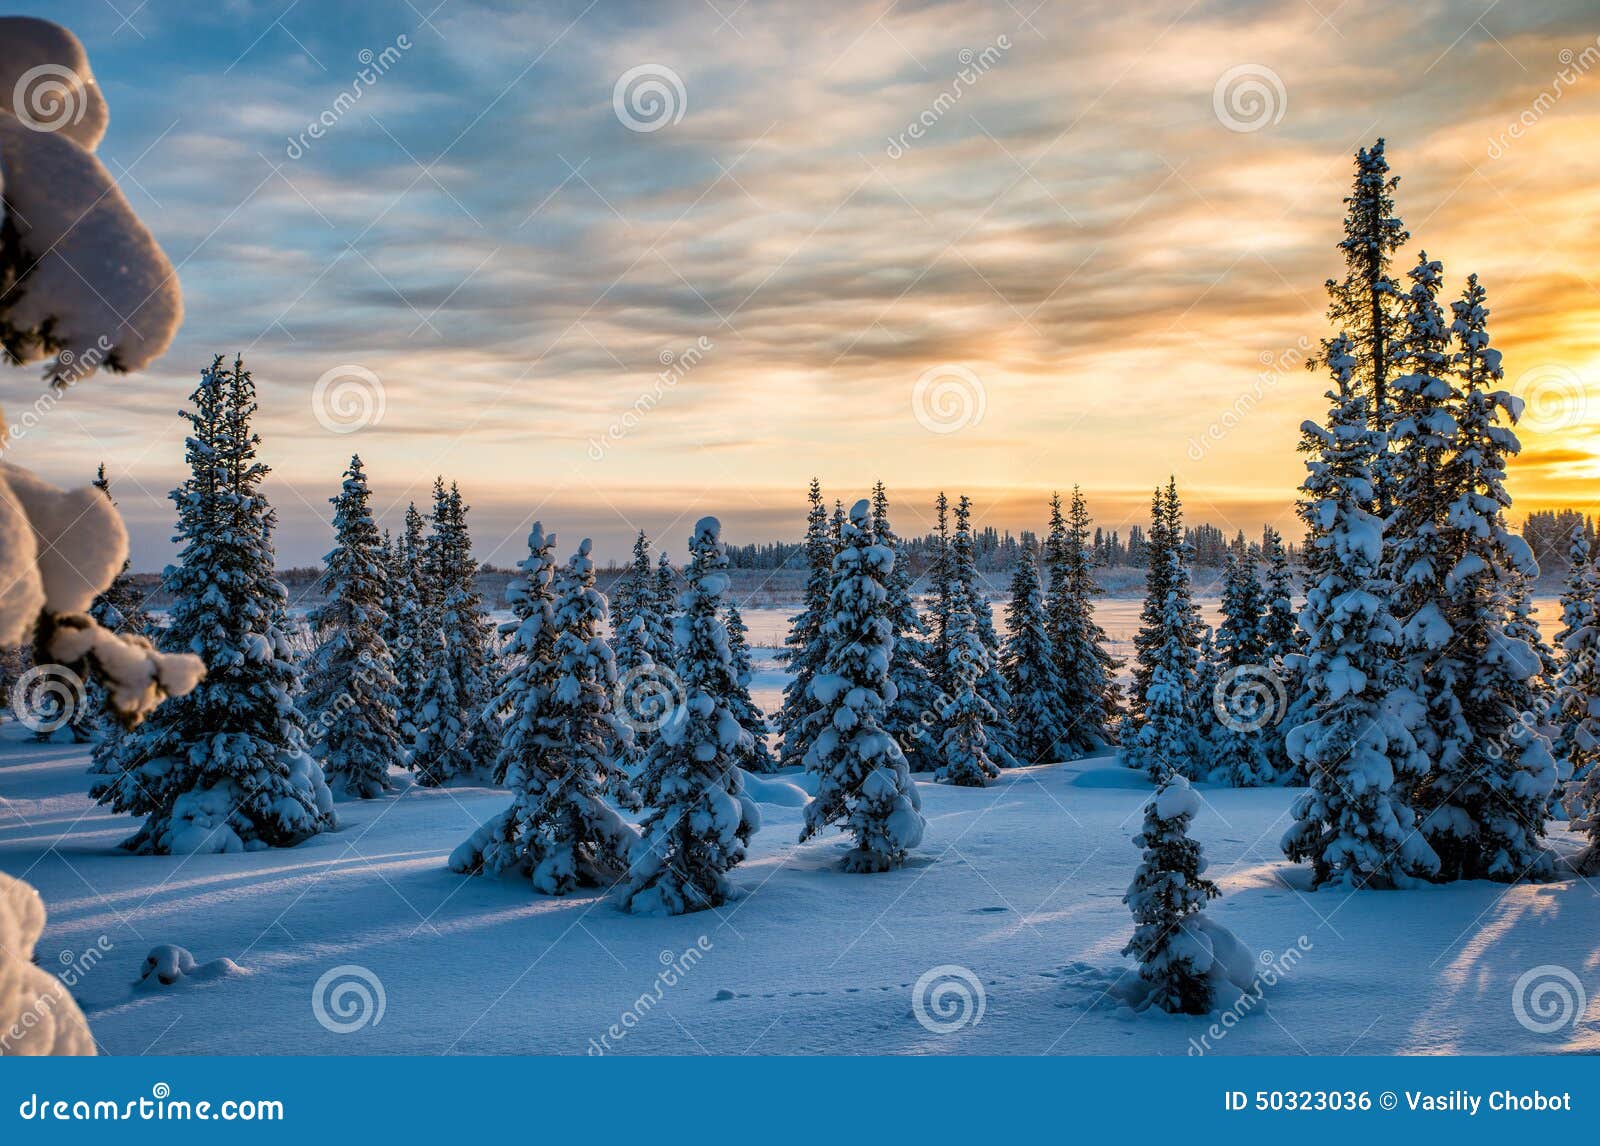 winter north foserst at sunset